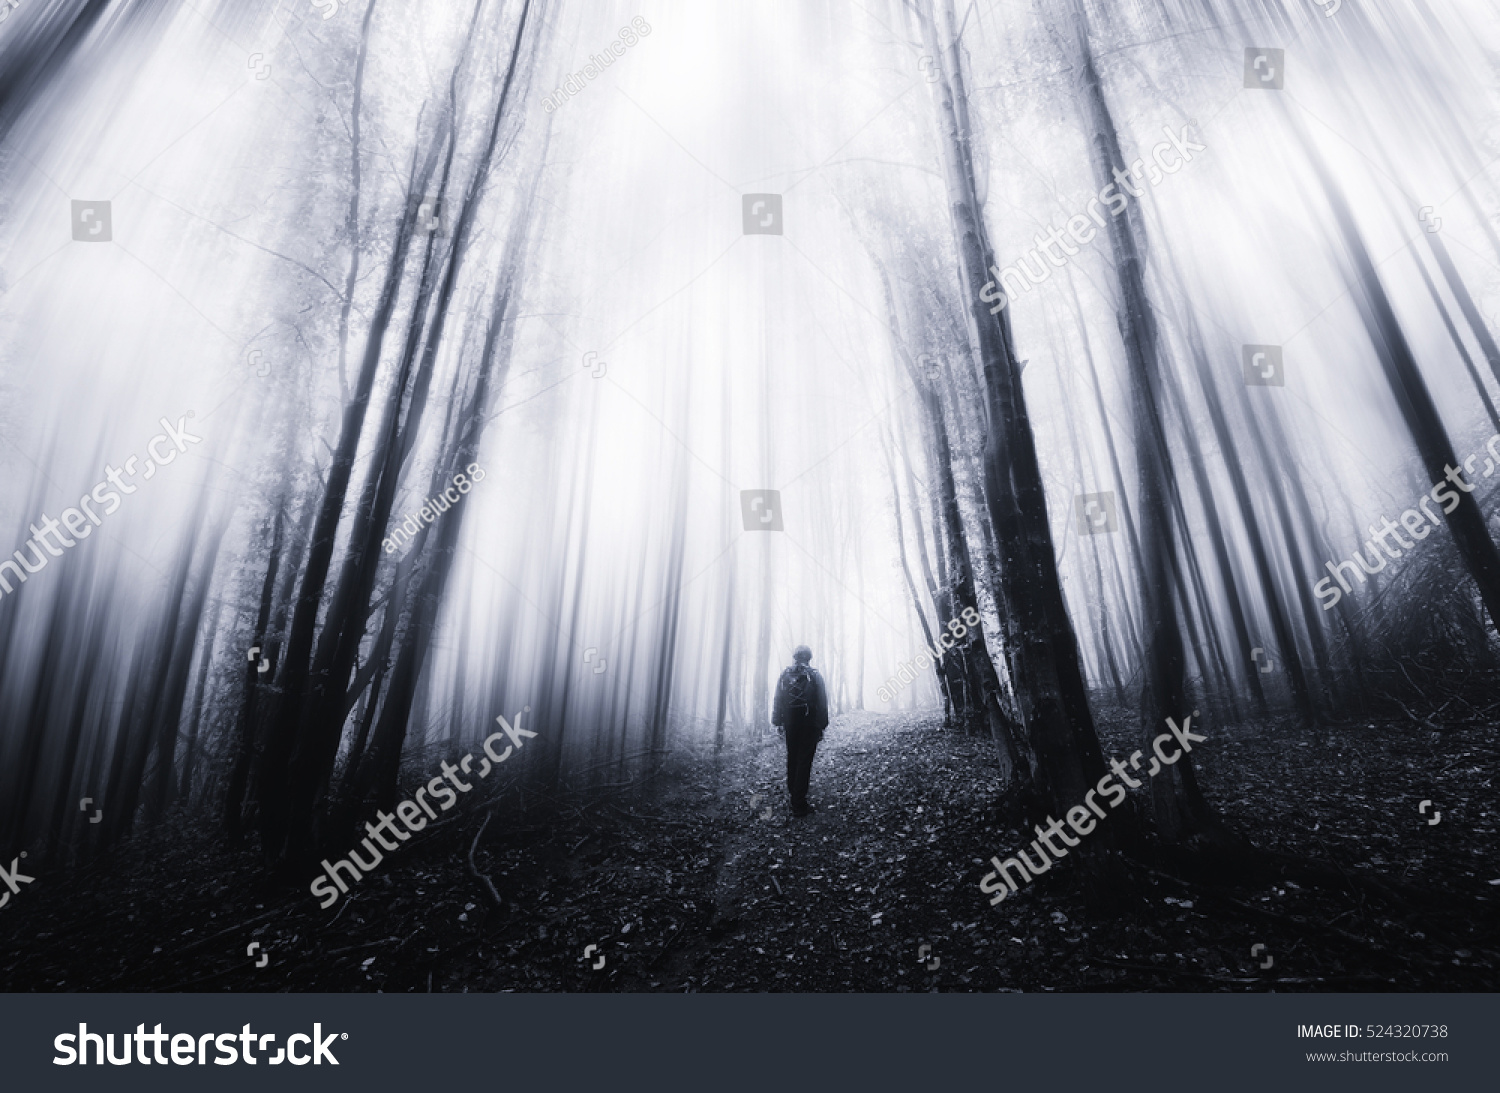 man walking in a surreal forest #524320738